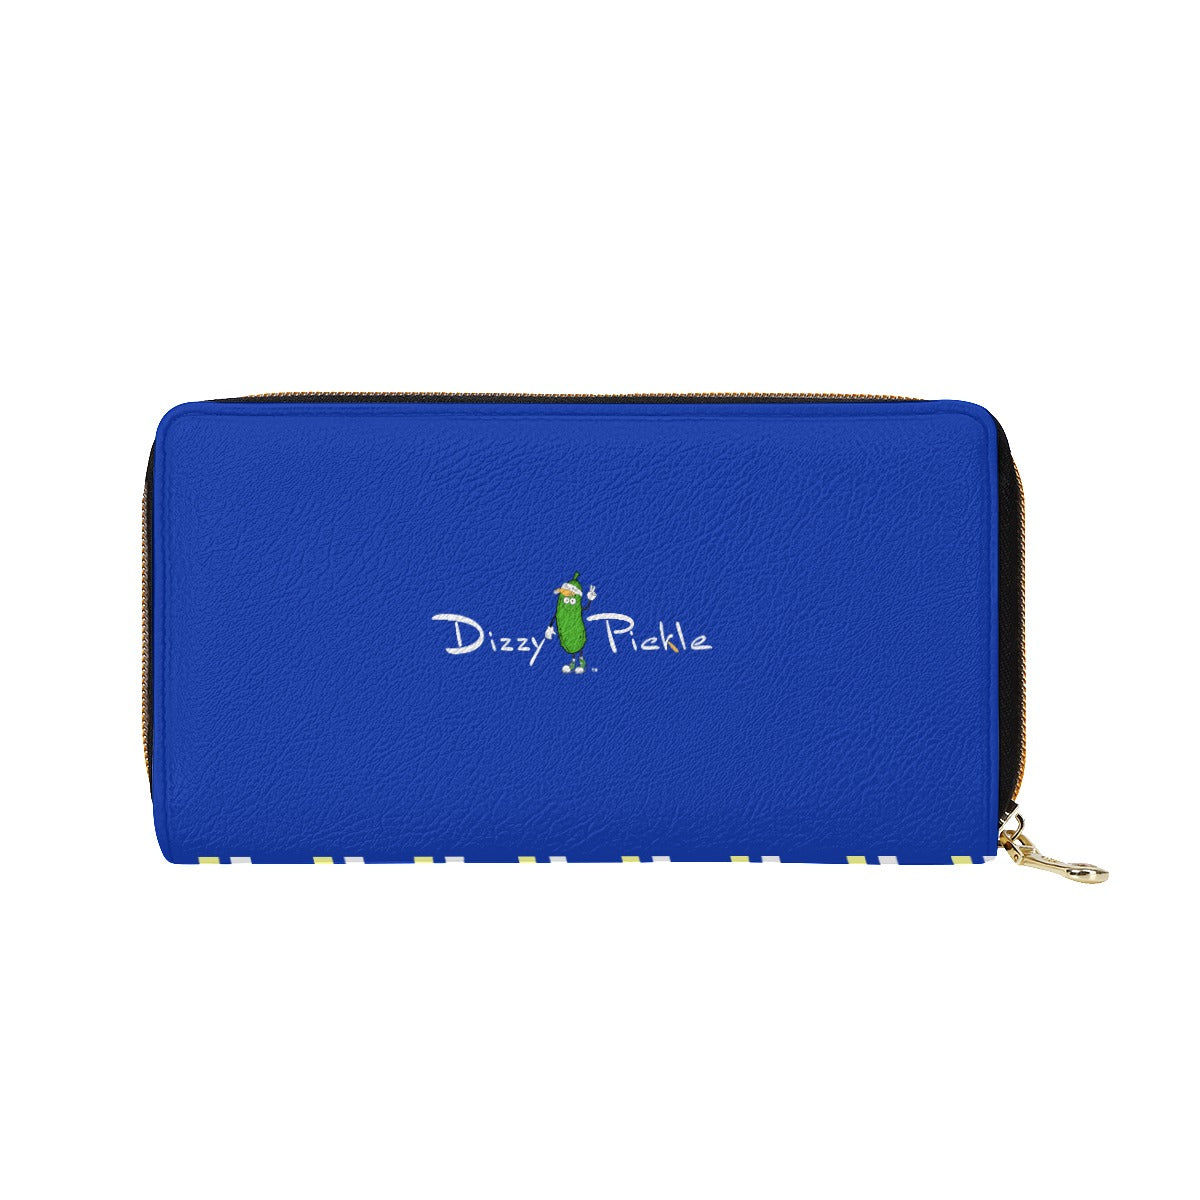 Coming Up Daisies - Blue/Yellow - Pickleball Mini Purse by Dizzy Pickle